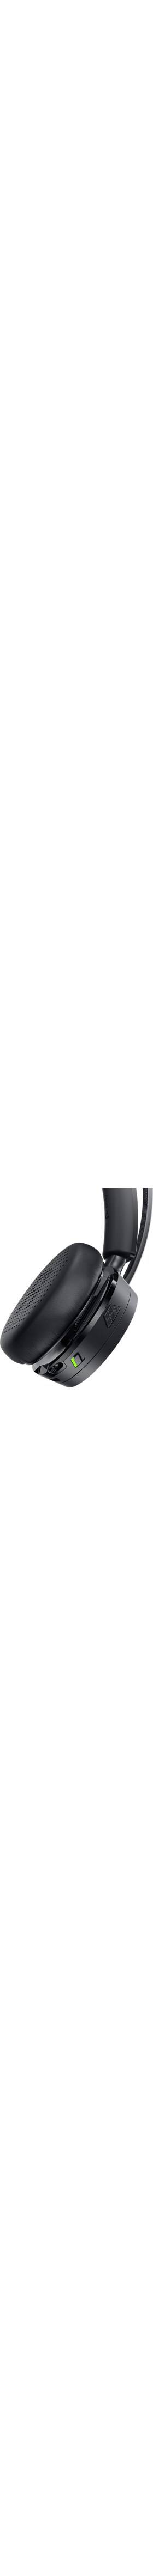 Picture of a Dell Pro Wireless Headset WL5022.